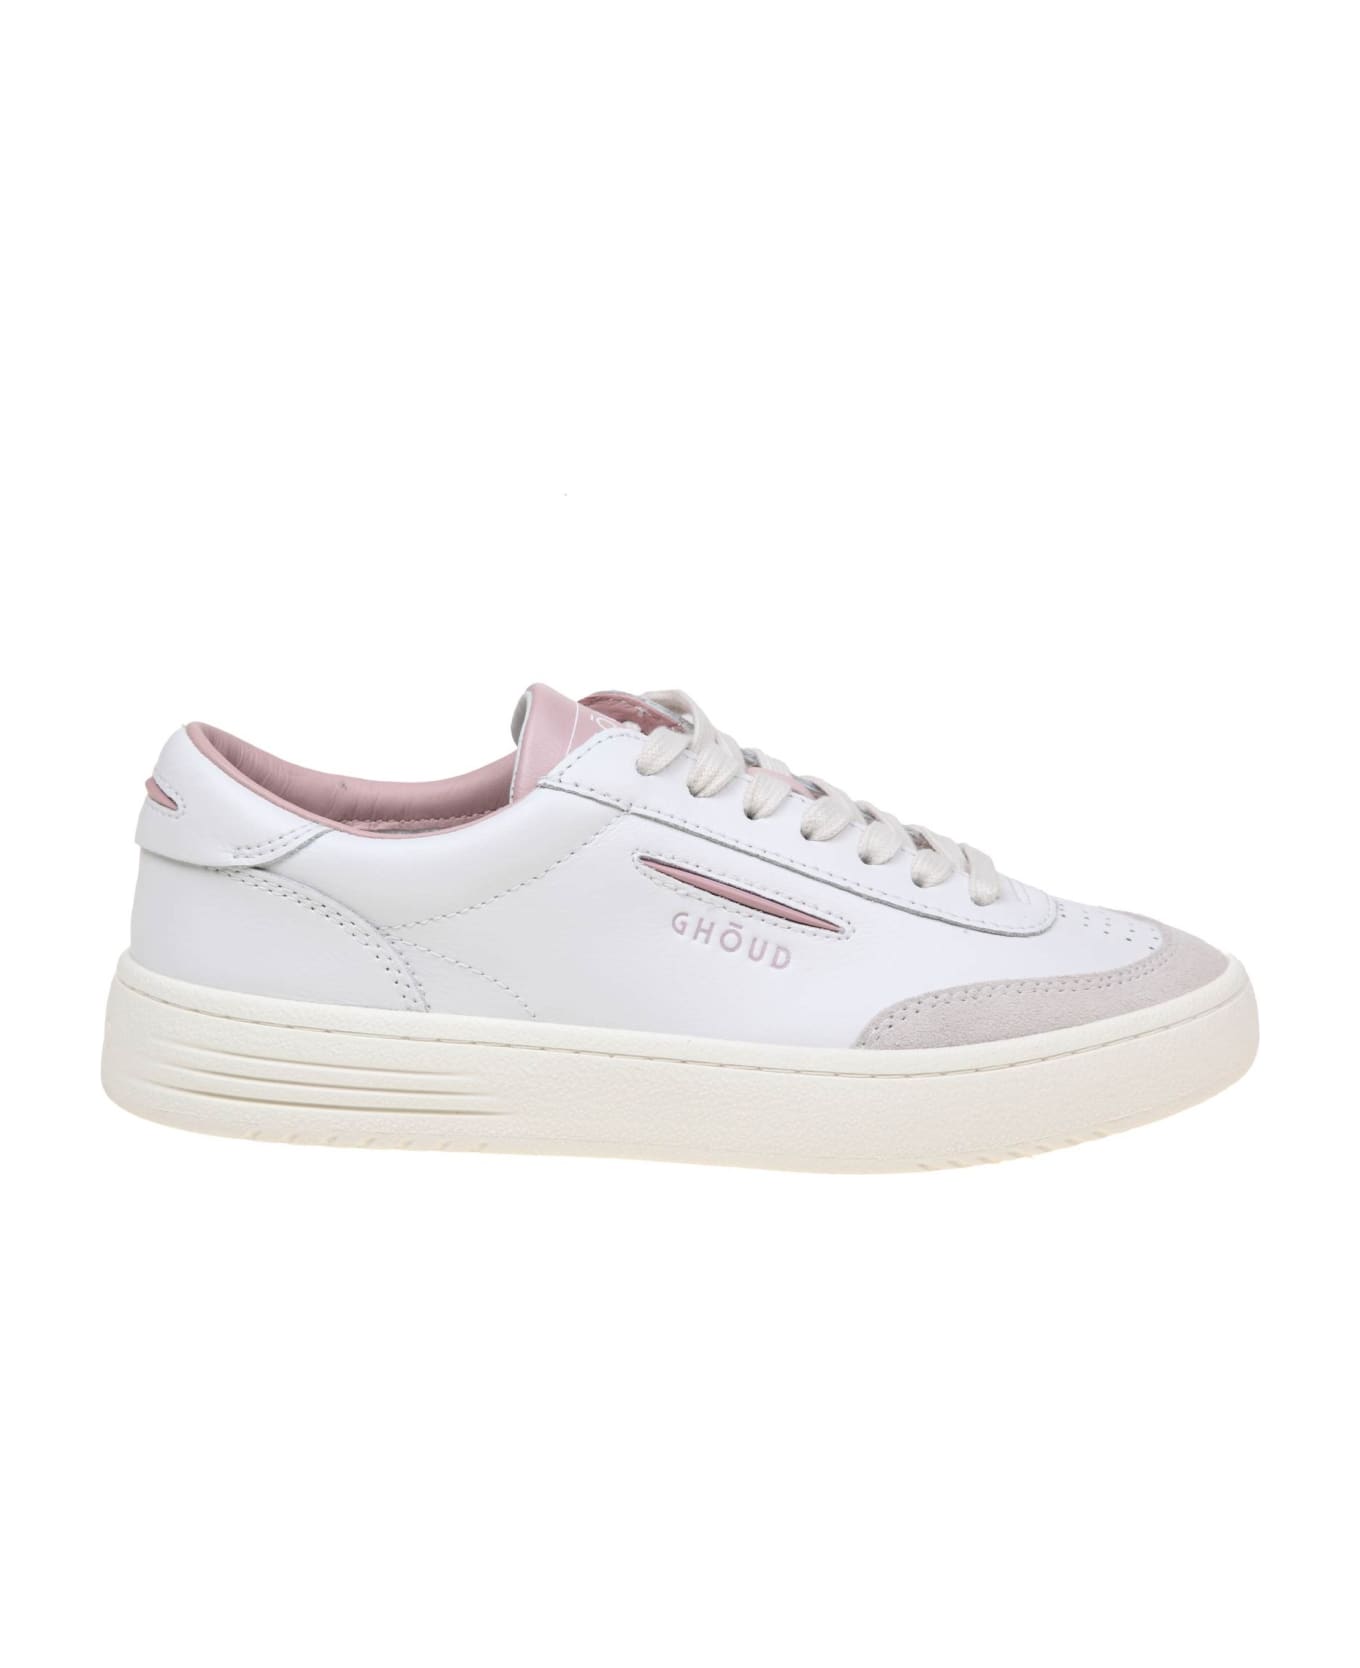 GHOUD Lido Low Sneakers In White/pink Leather And Suede - Pink